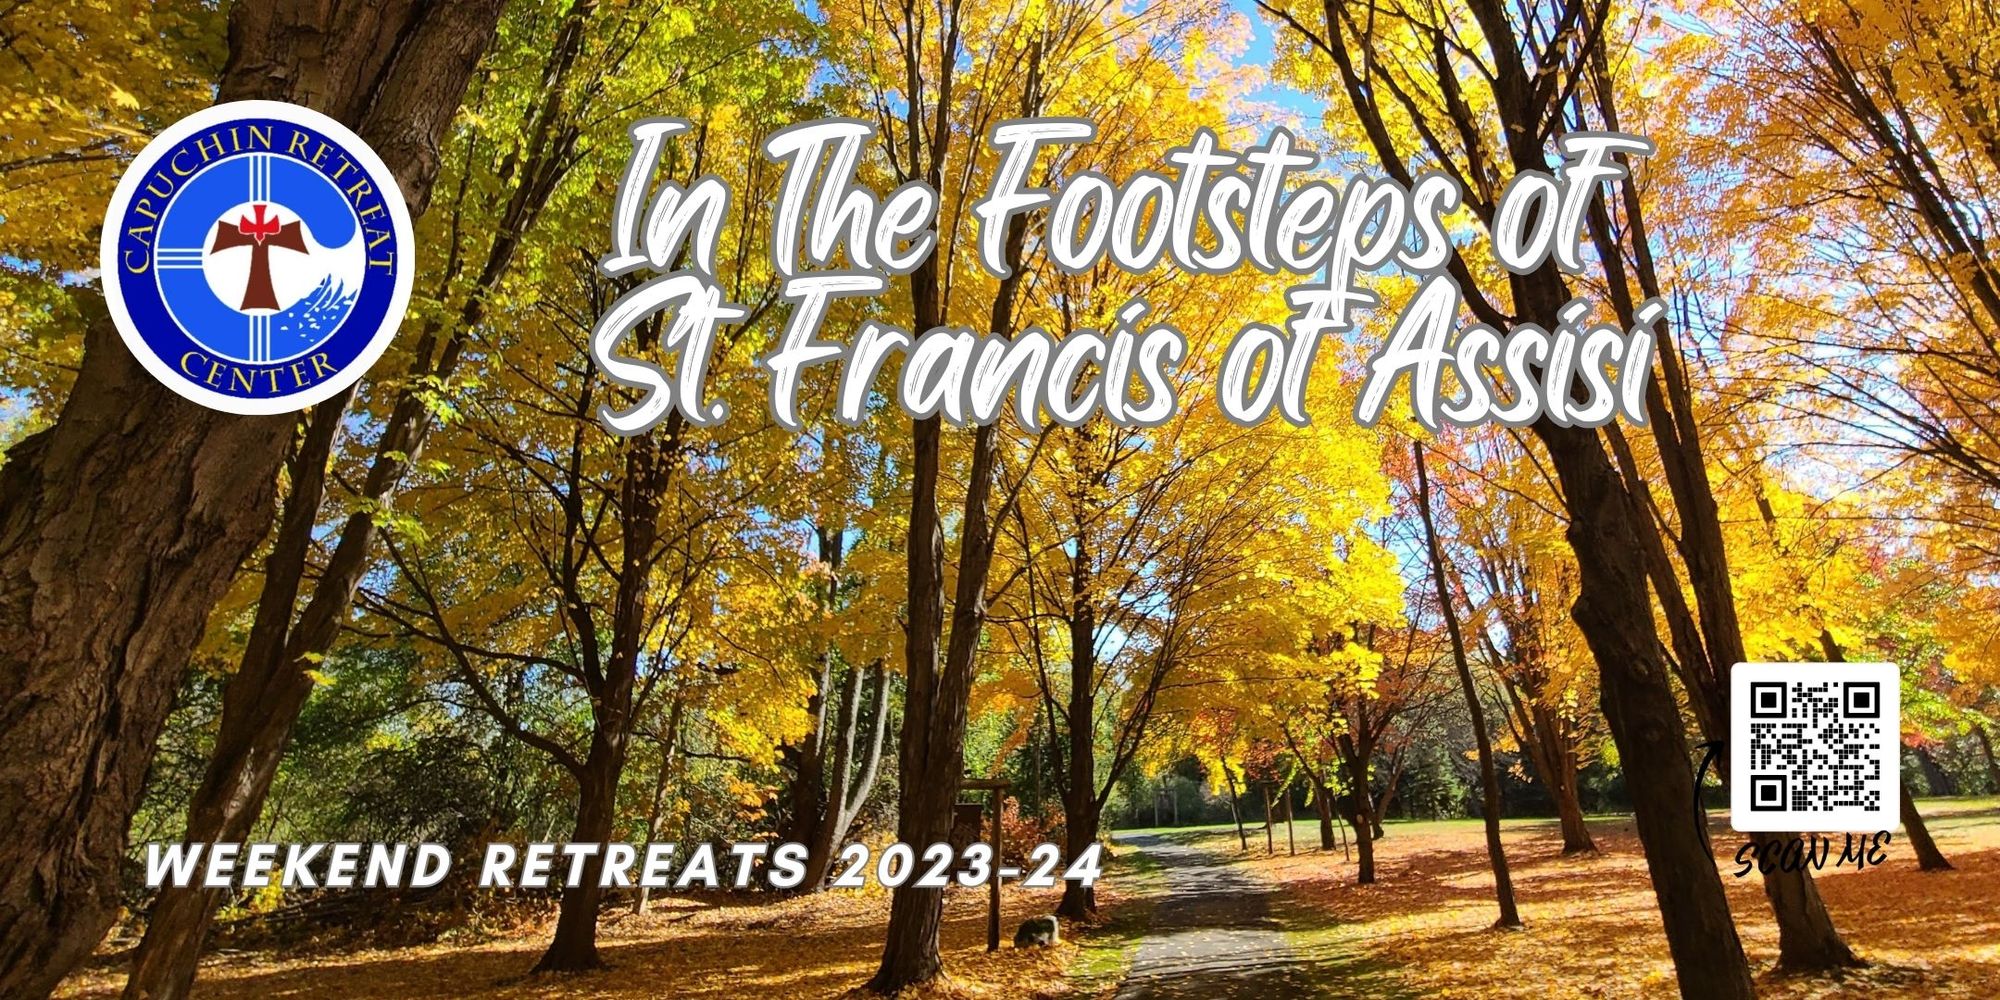 A fall color landscape photograph of the grounds at Capuchin Retreat with colorful foliage on the trees. The Capuchin Retreat logo and a QR code are superimposed on the photo along with the headline: "In the Footsteps of St. Francis of Assisi" and the subheadline: "Weekend Retreats 2023-24."